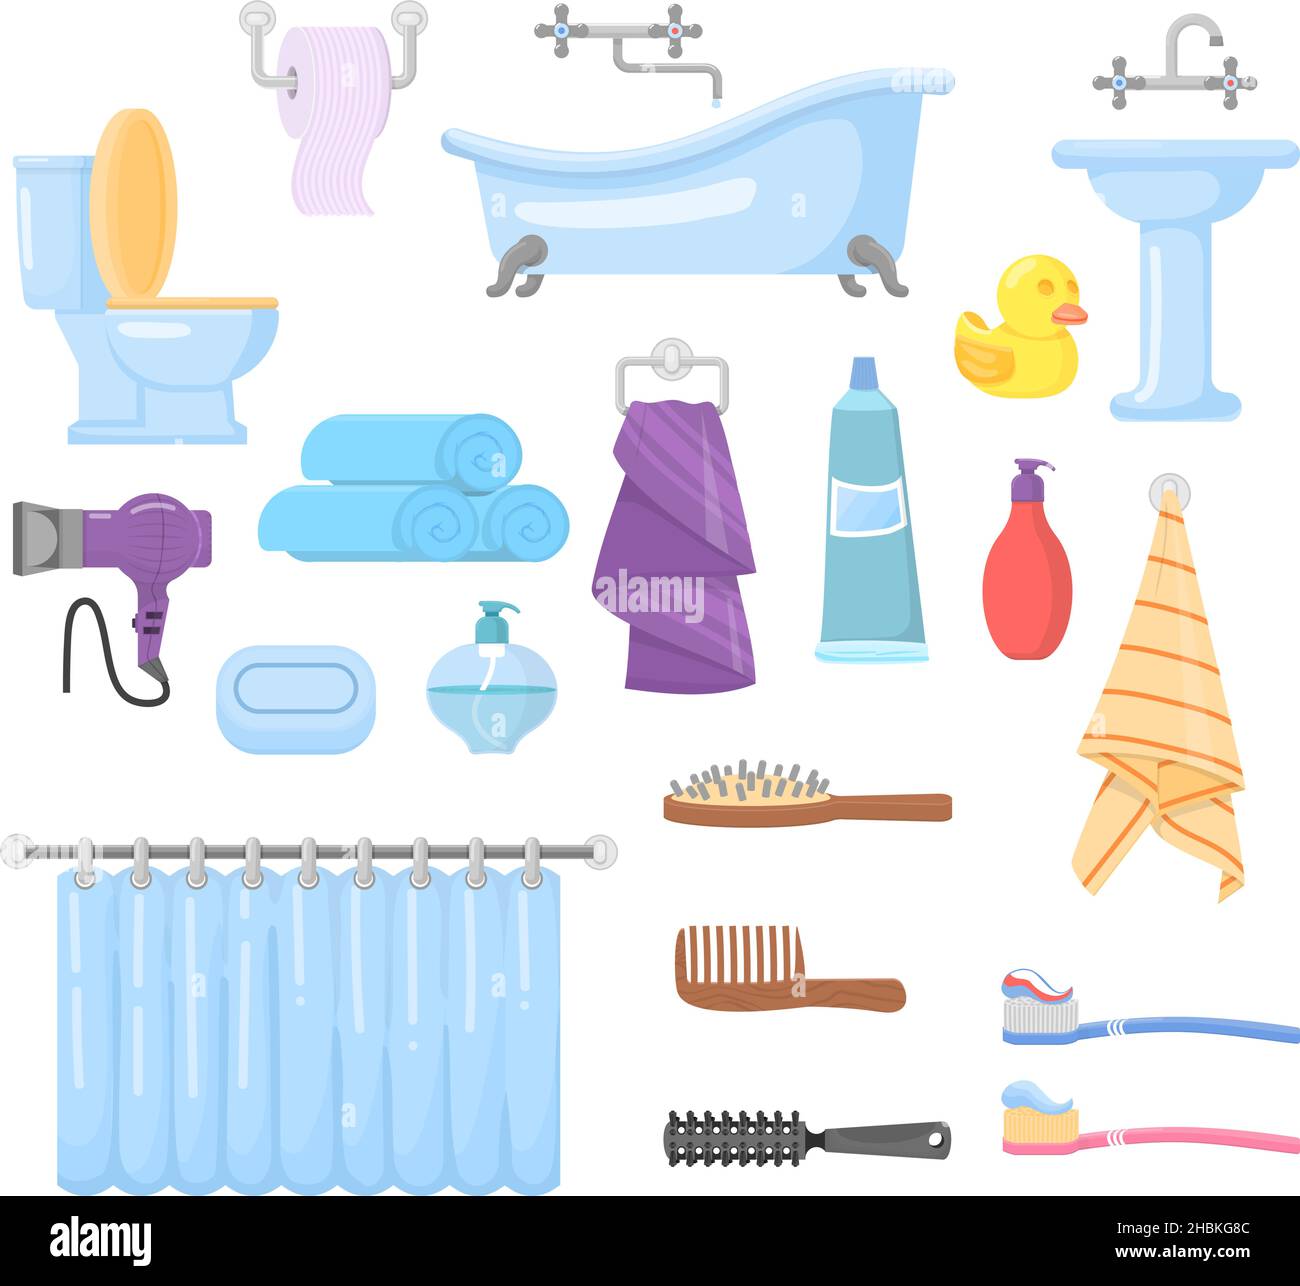 Bathroom accessories. Toothbrush, toilet and soap. Bath interior elements, hygiene cartoon icons. Towels and bottle, bathtub decent vector collection Stock Vector